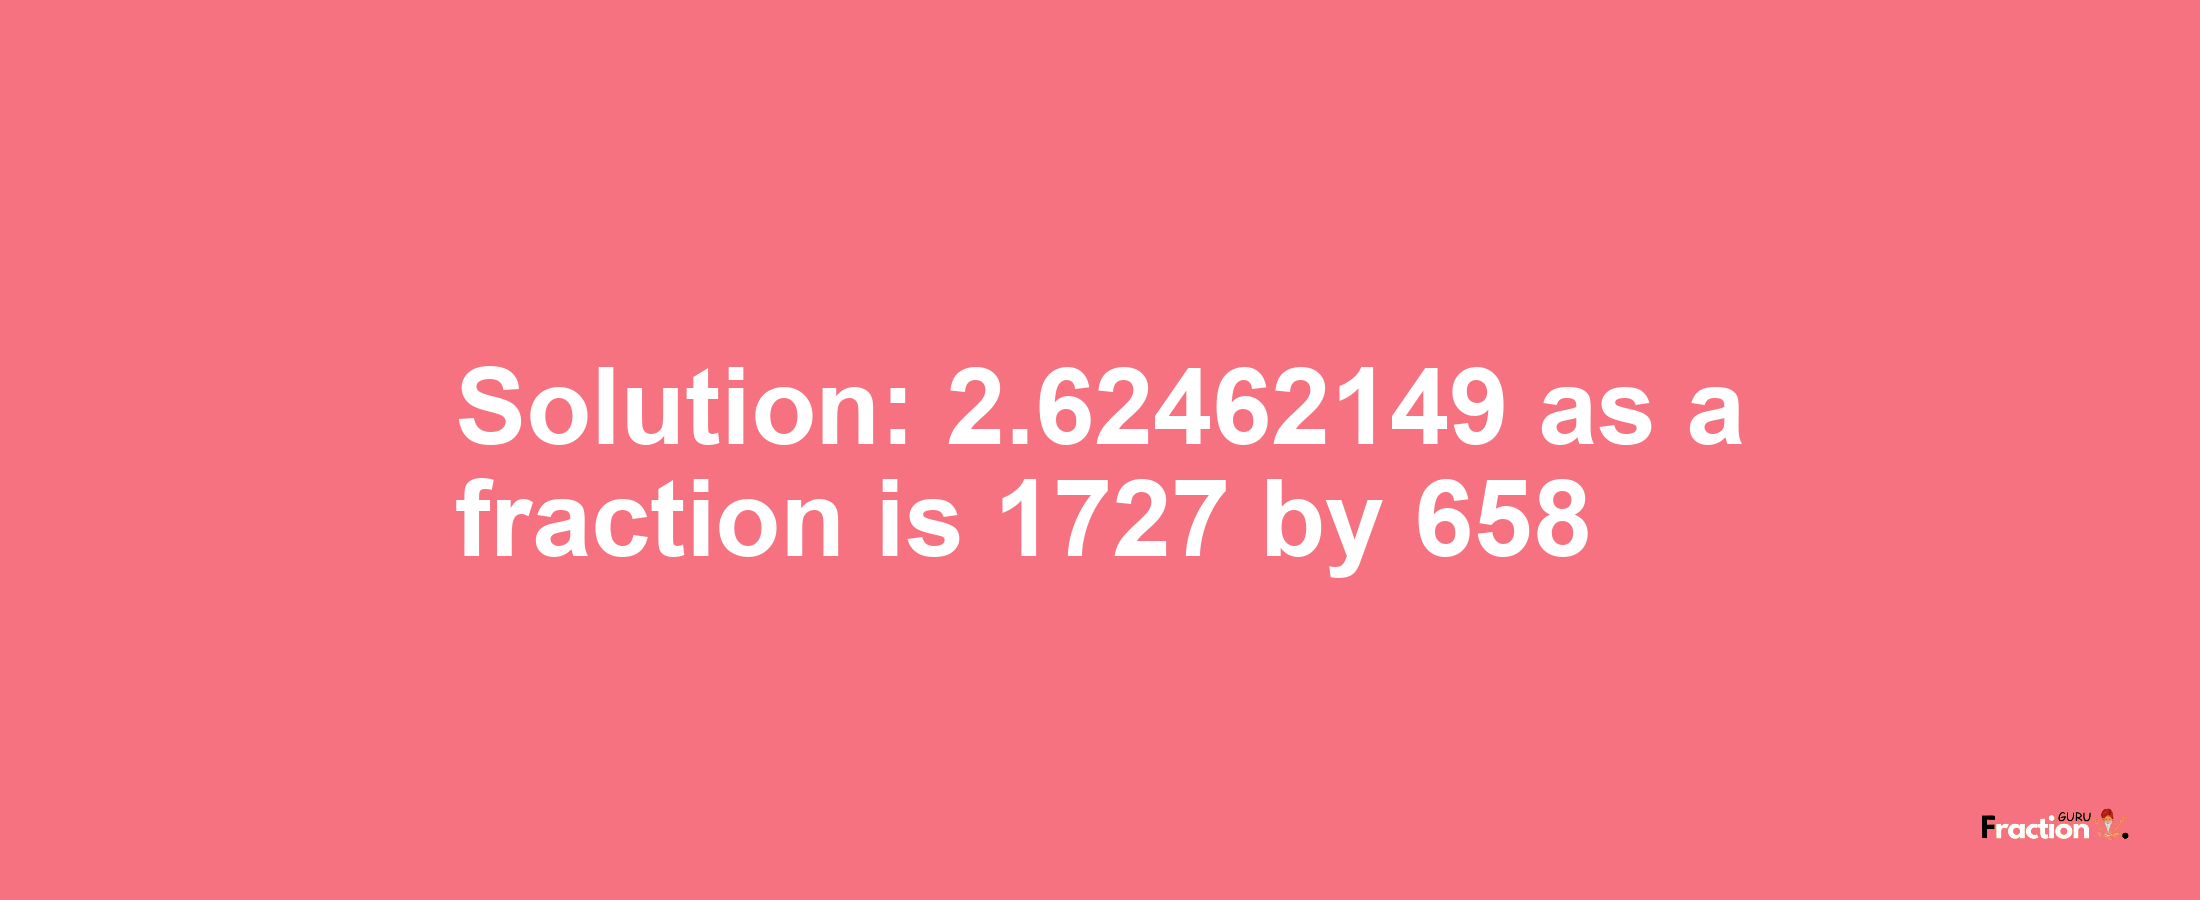 Solution:2.62462149 as a fraction is 1727/658